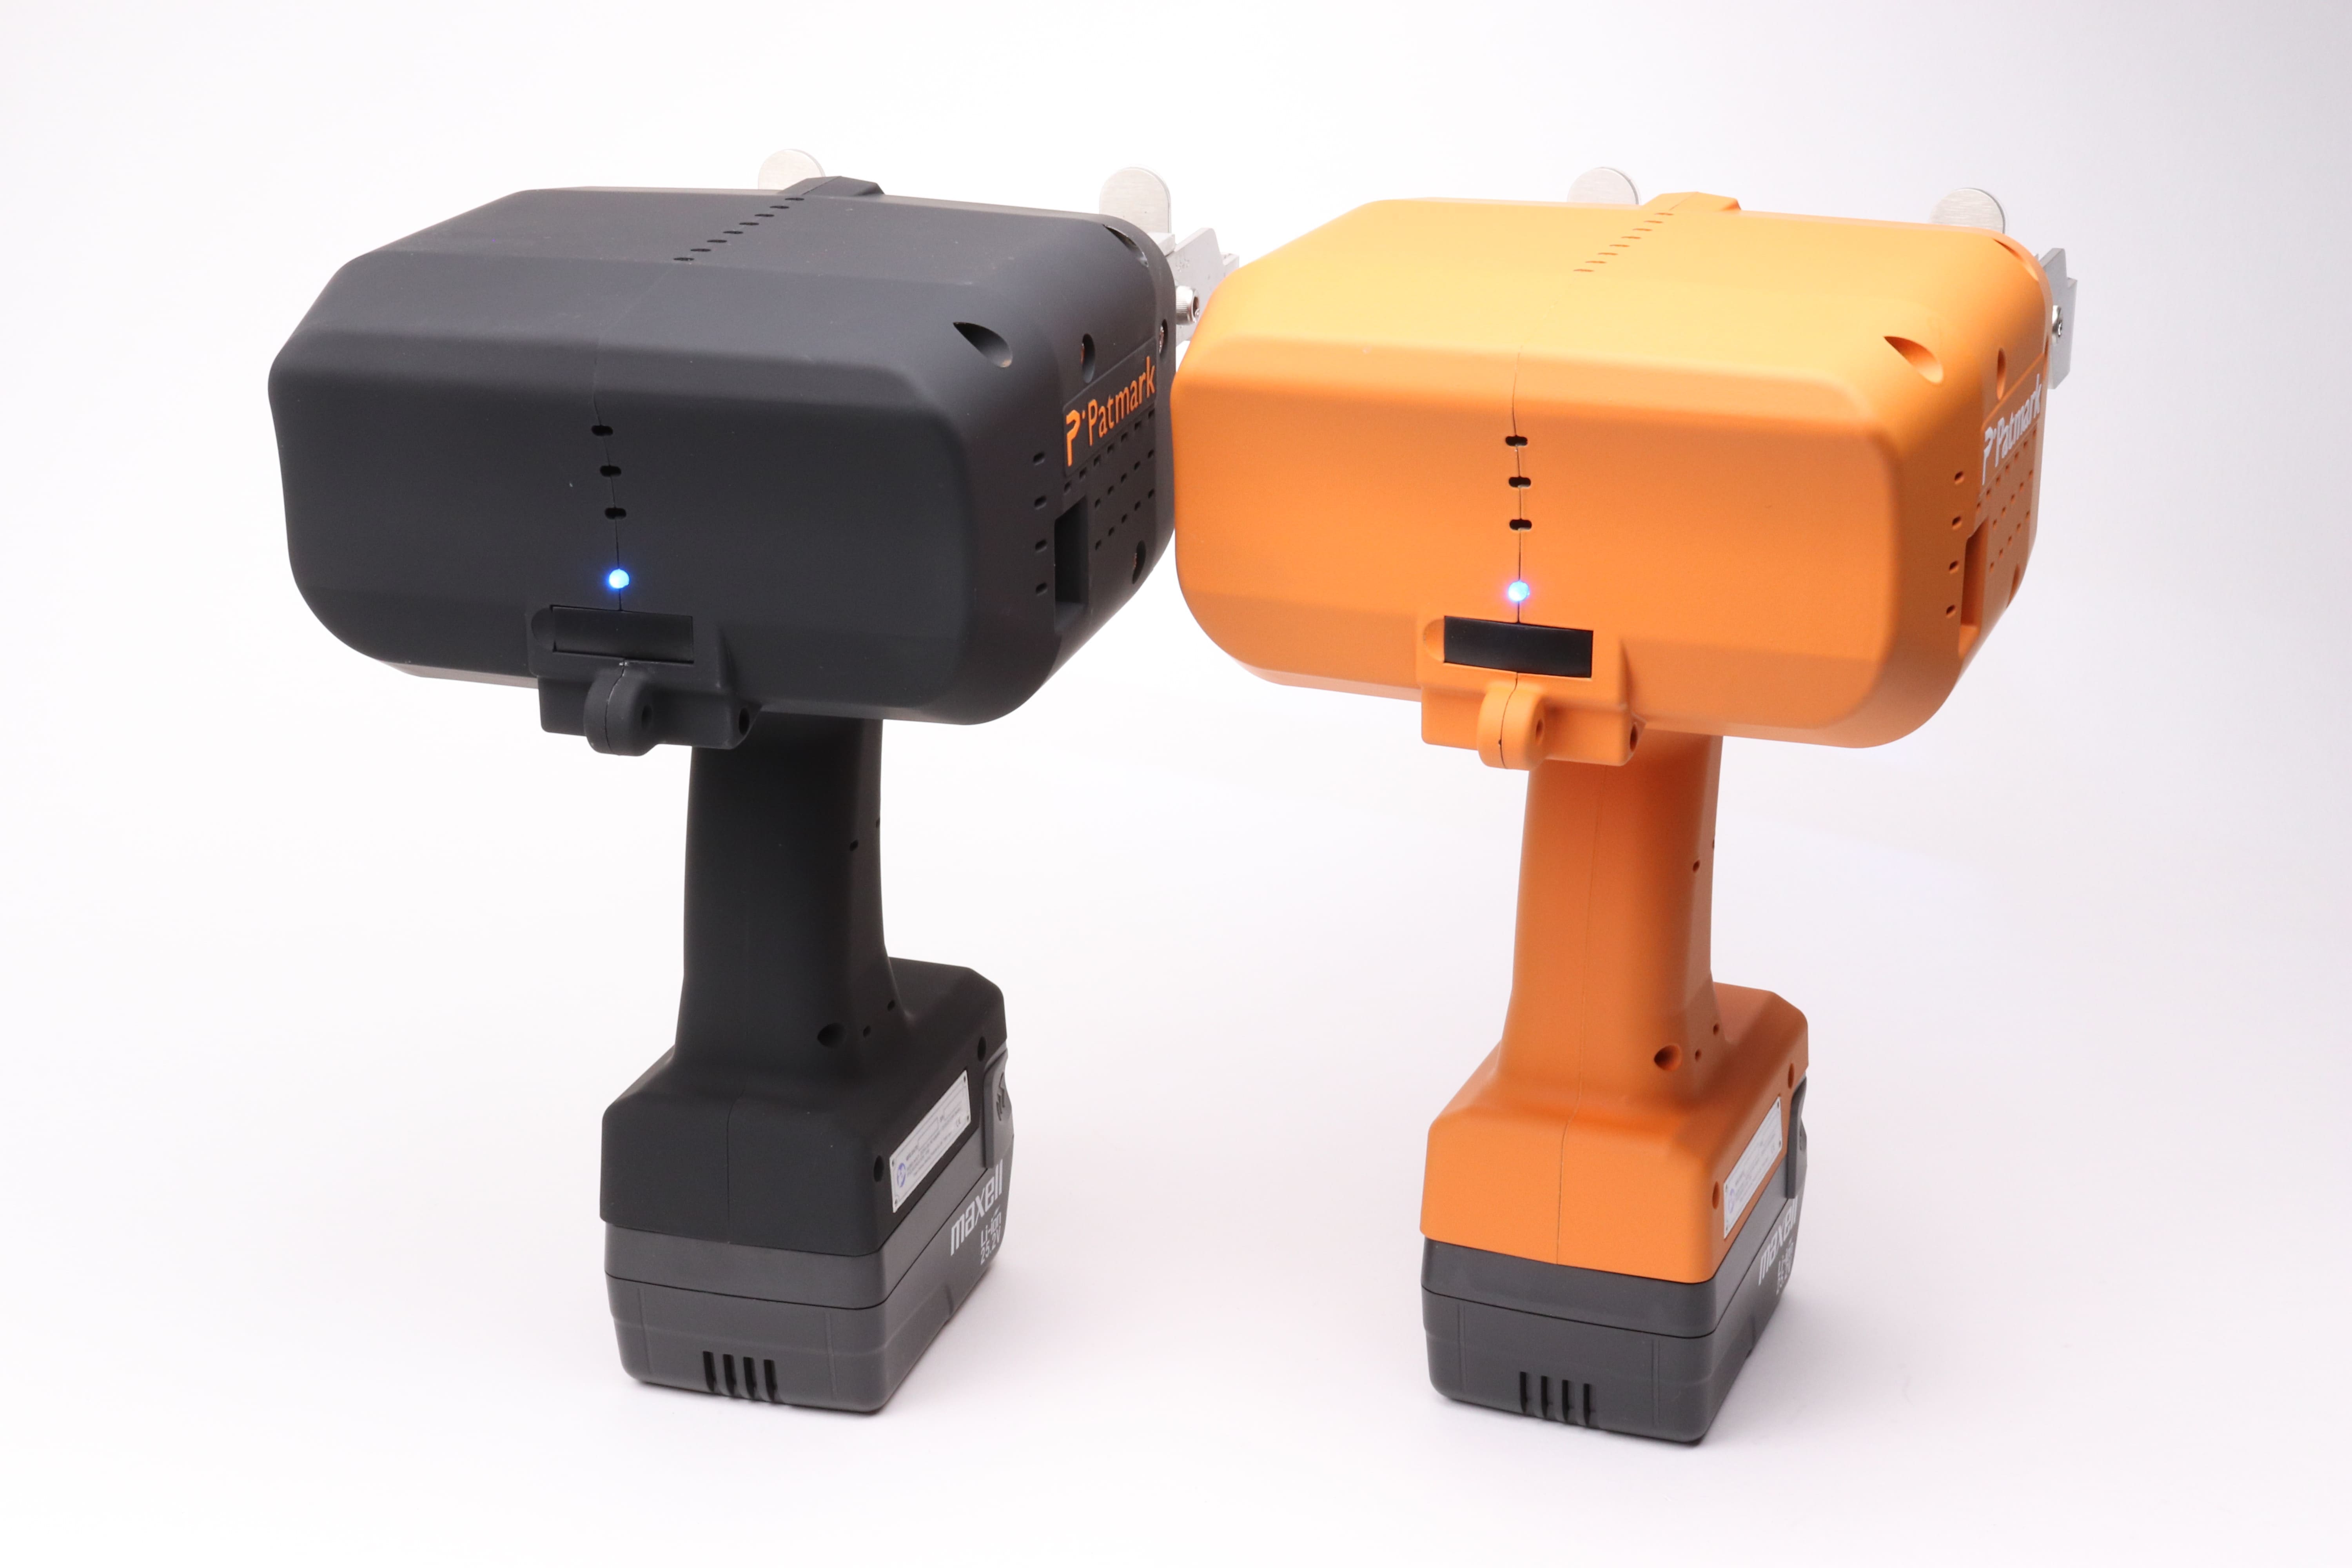 Image of the rear view of the Patmark-plus units of the Patmark series, one in orange and one in black.